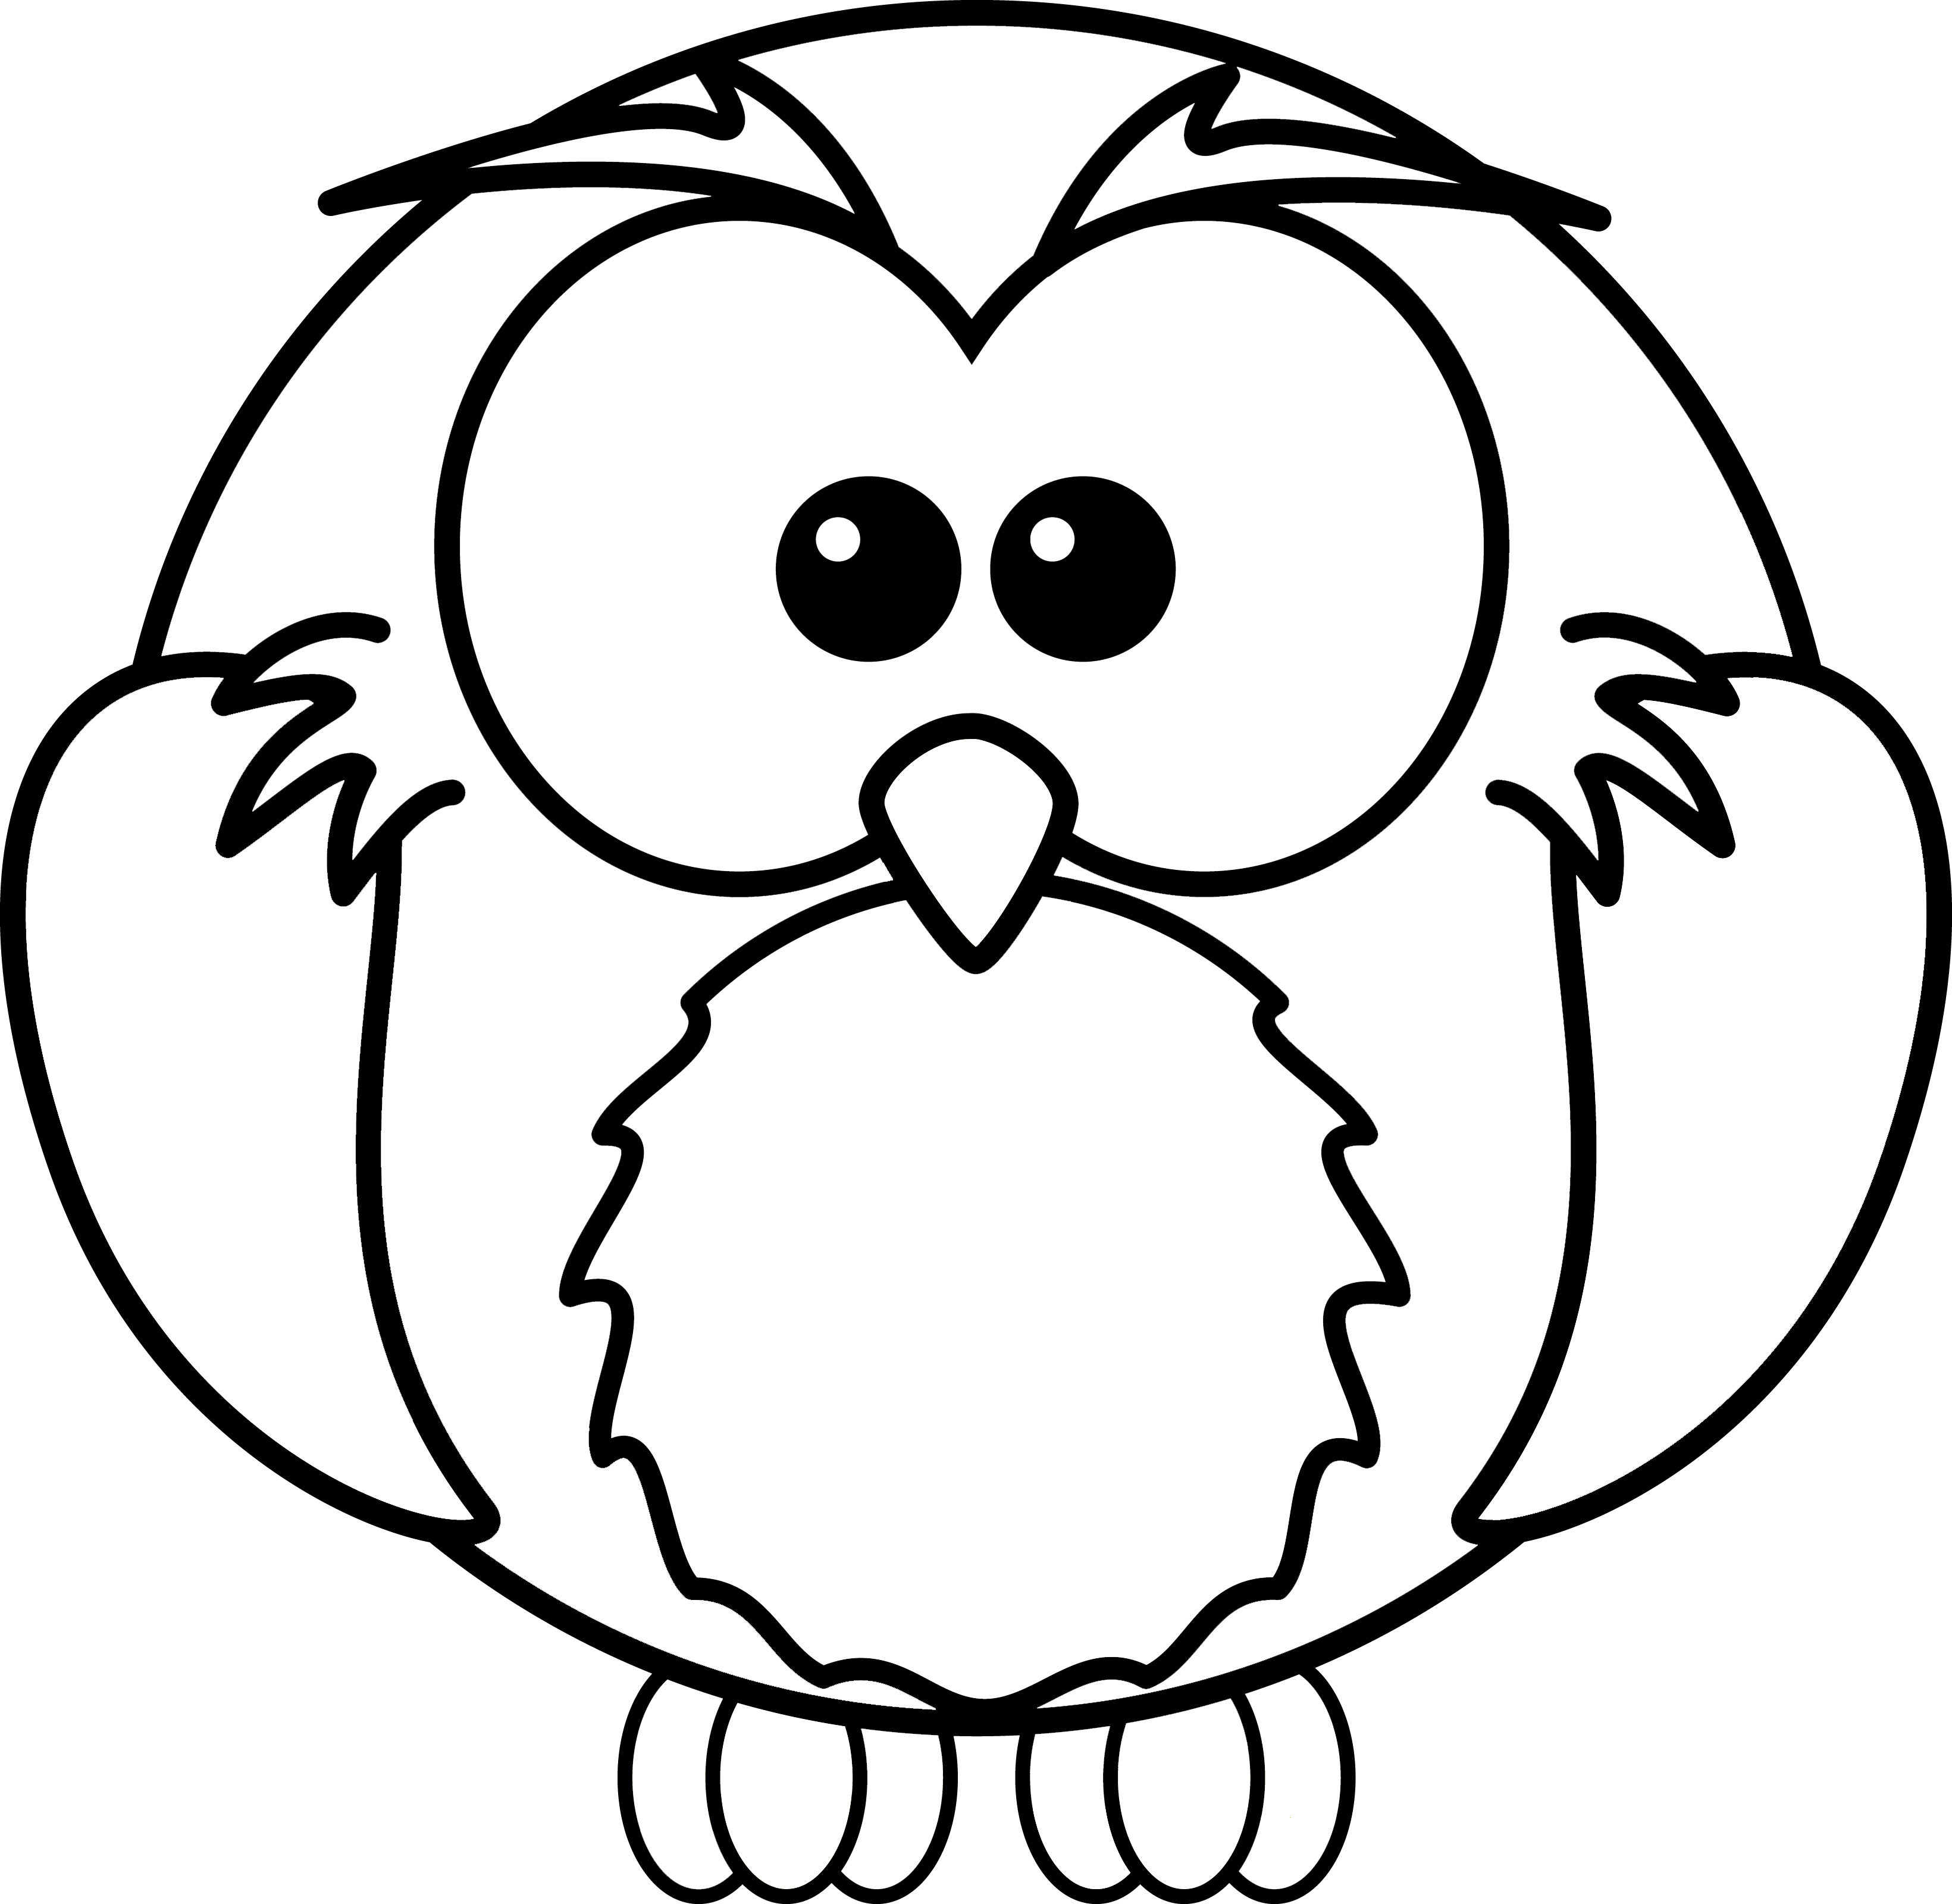 Owl Coloring Pages Free 1